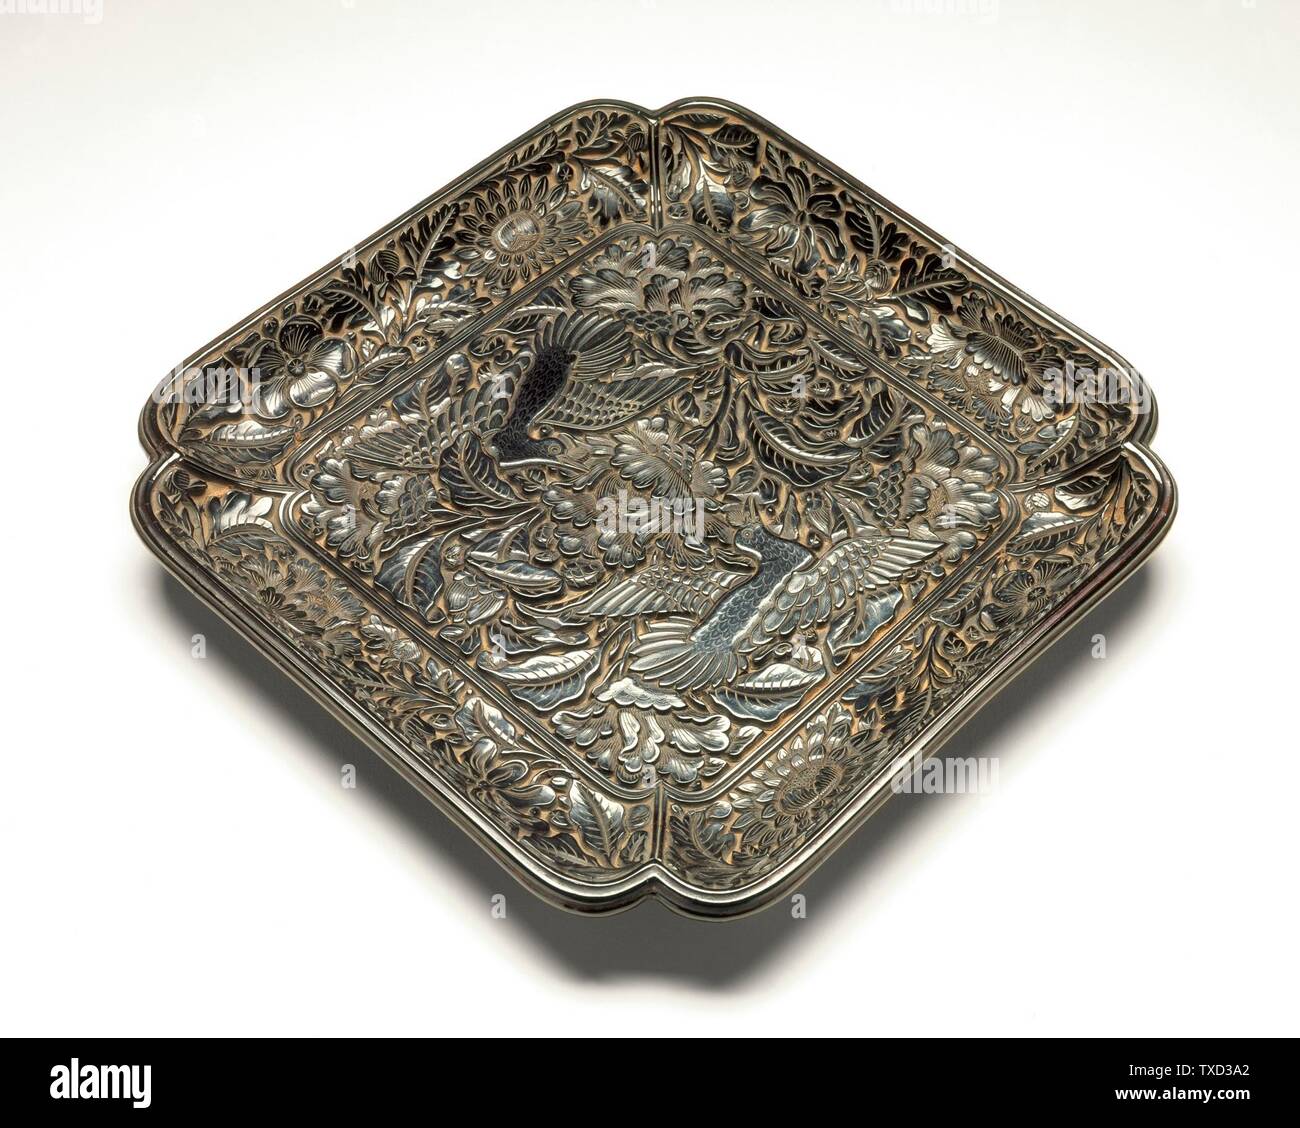 Square Tray (Fang Pan) with Pair of Birds in Peonies (image 2 of 2);  China, Chinese, early Ming dynasty, about 1368-1450 Furnishings; Serviceware Carved black lacquer on wood core Gift of Mr. and Mrs Richard W. Chan (M.87.204.2) Chinese Art; between circa 1368 and circa 1450 date QS:P571,+1500-00-00T00:00:00Z/6,P1319,+1368-00-00T00:00:00Z/9,P1326,+1450-00-00T00:00:00Z/9,P1480,Q5727902; Stock Photo